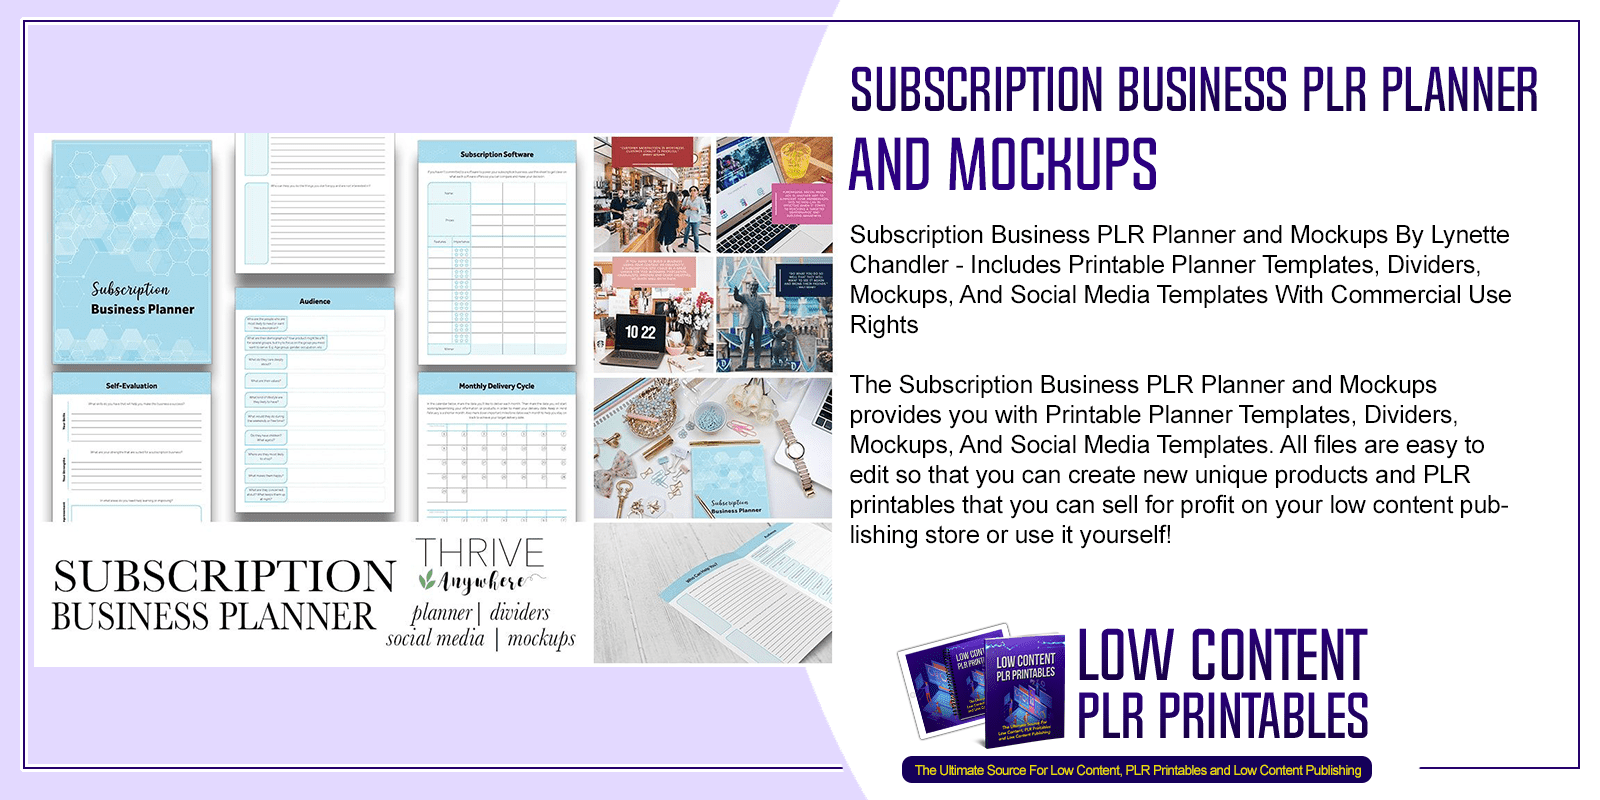 Subscription Business PLR Planner and Mockups